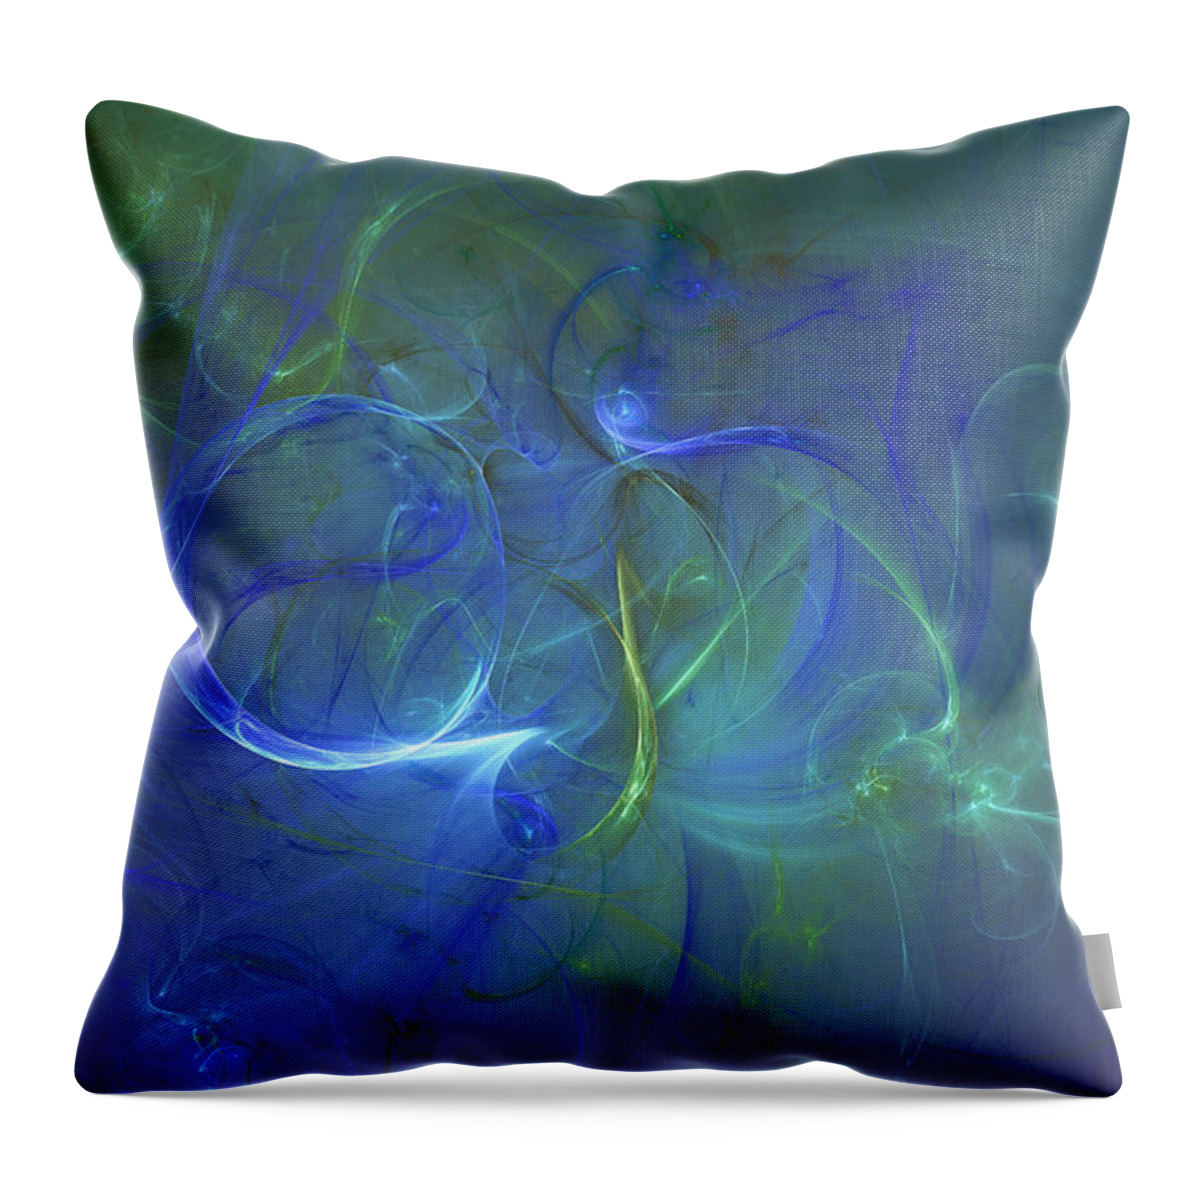 Art Throw Pillow featuring the digital art Concerning Female Beauty by Jeff Iverson